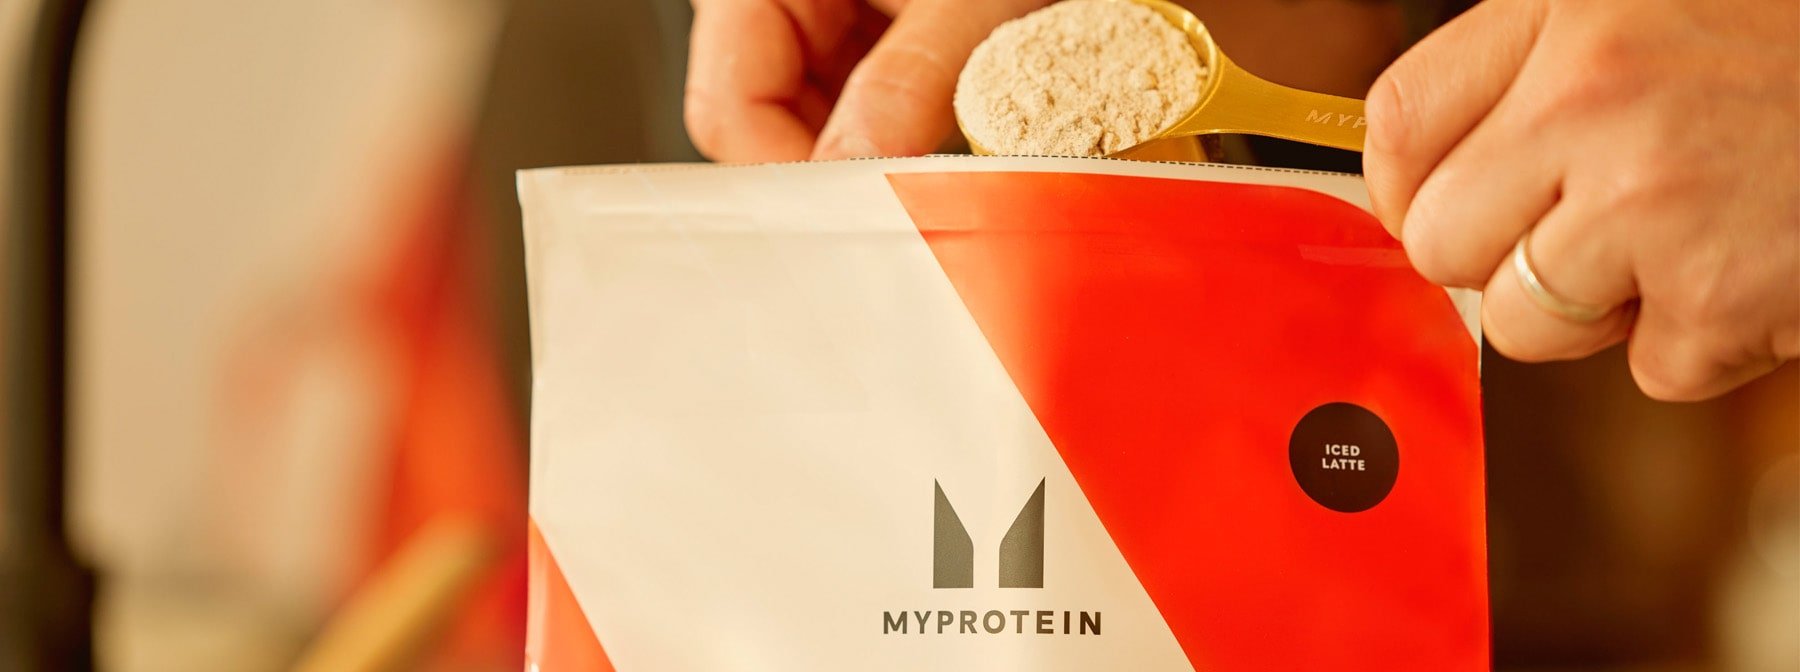 Myprotein's Best Whey Protein Flavours According To You